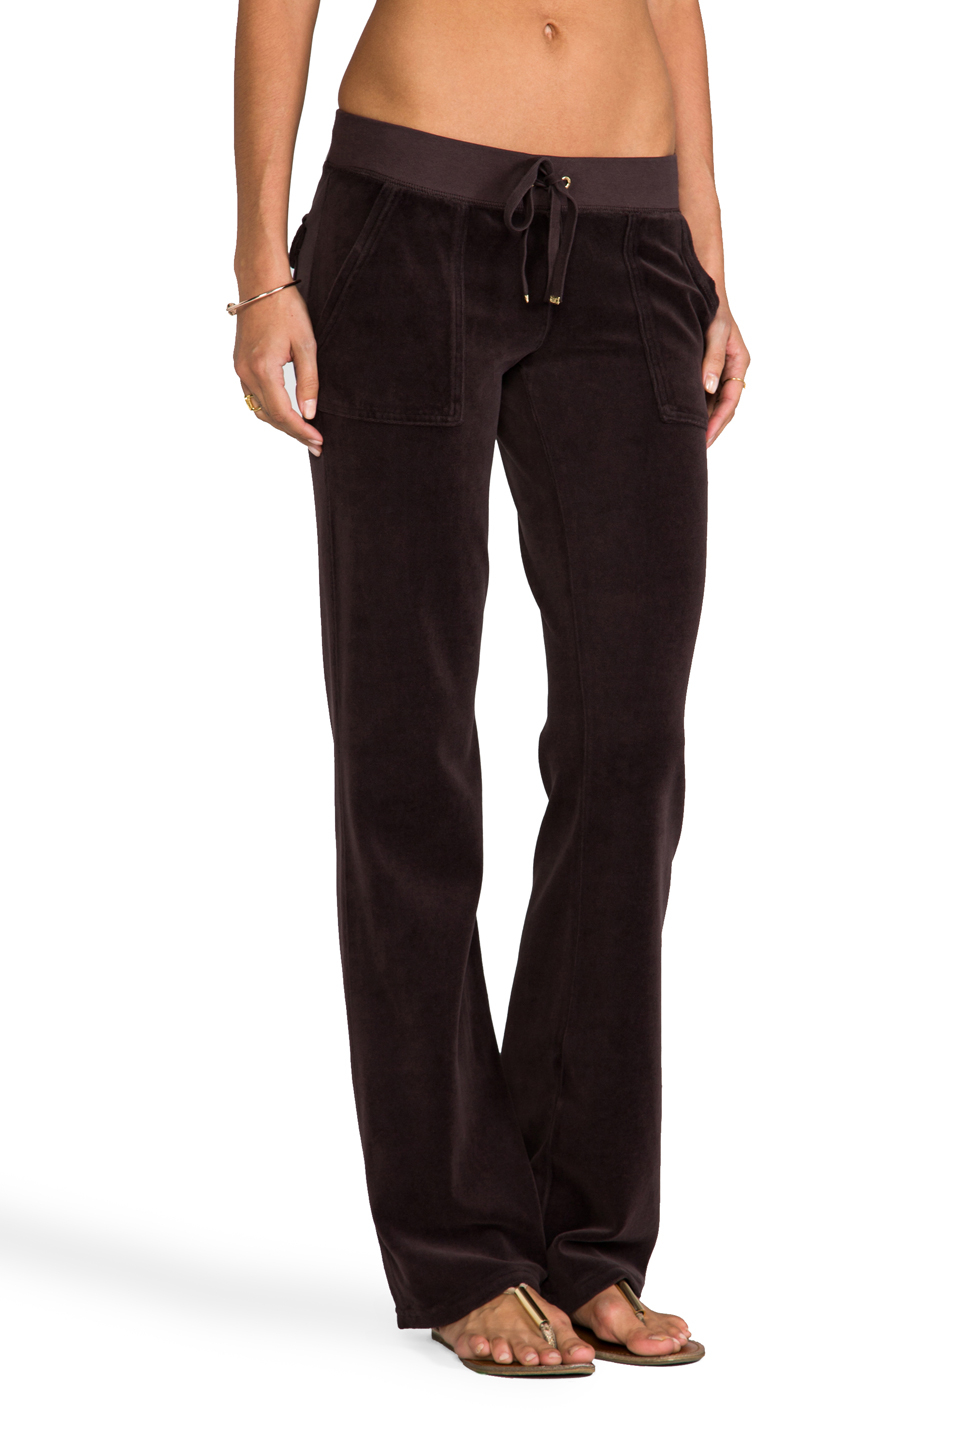 Juicy Couture Velour Flared Leg Pant with Snap Pockets in Chestnut ...